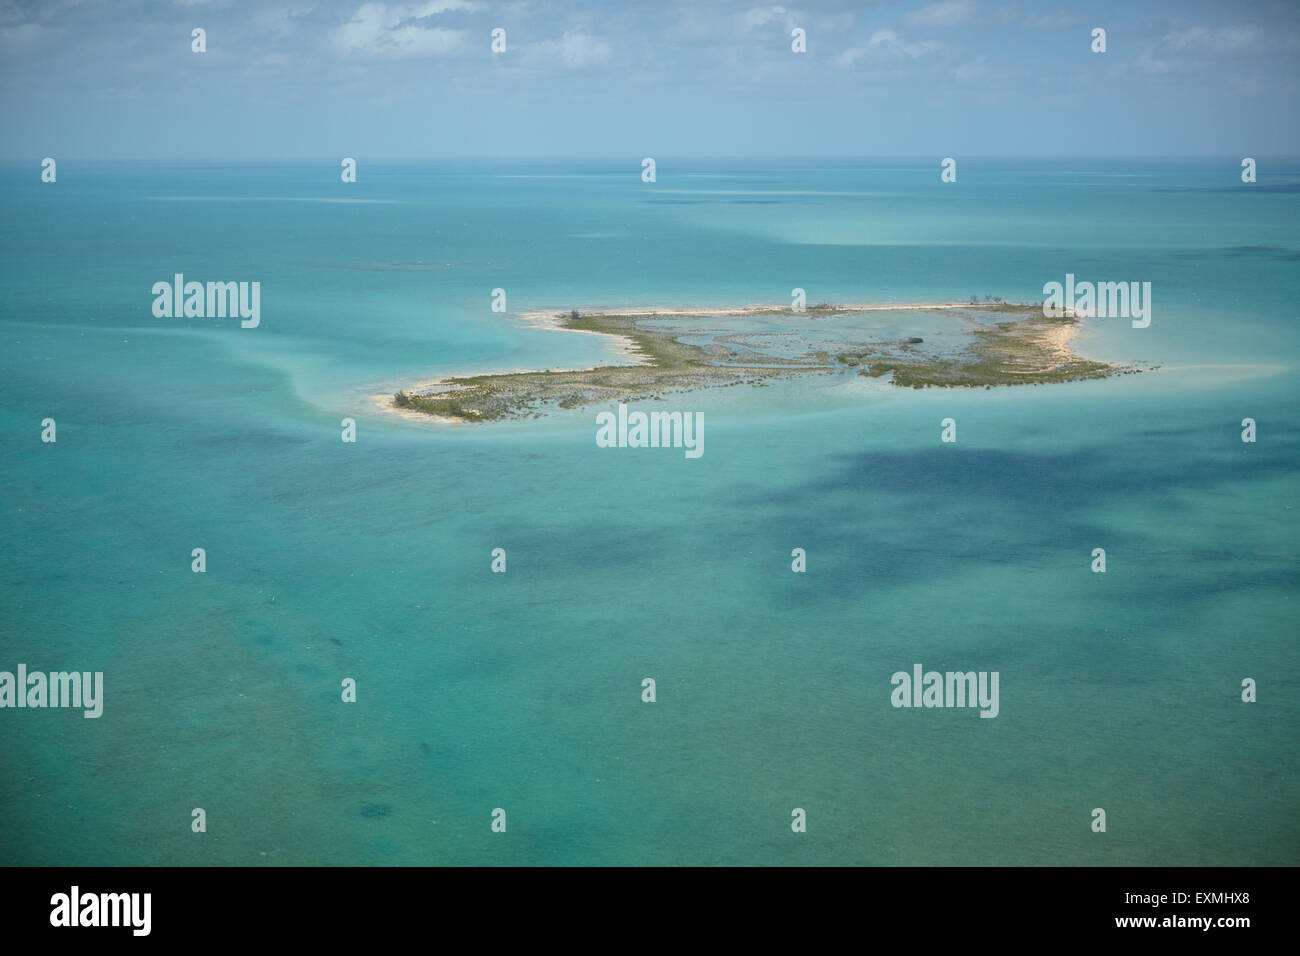 Aerial View of an inhabited island in the Bahamas. Stock Photo